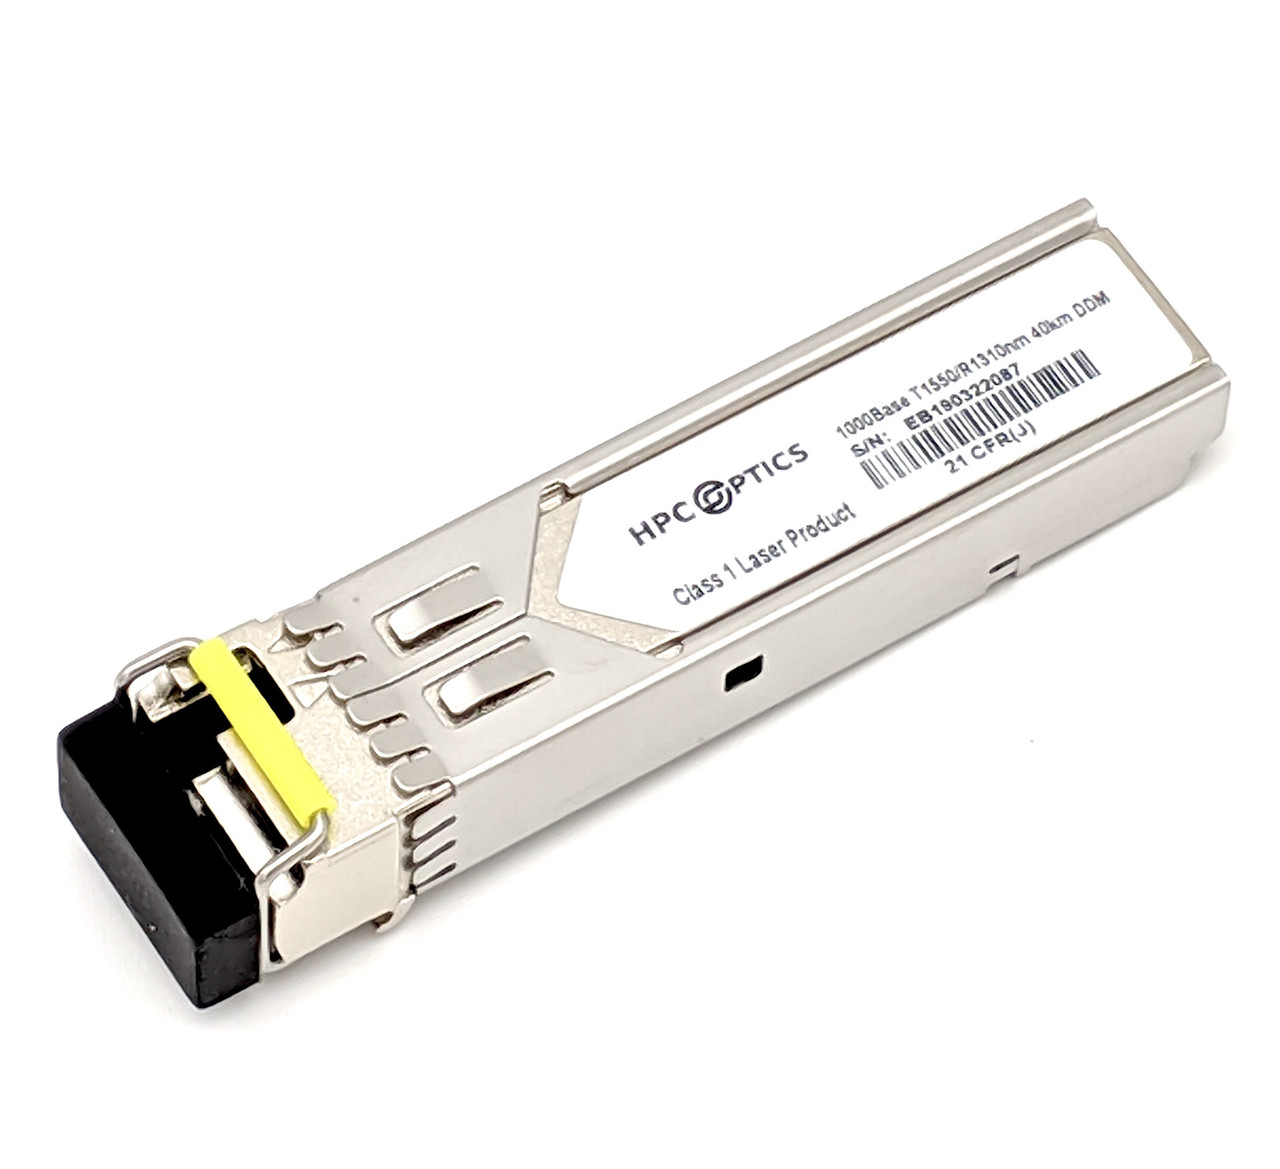 Switch Modules New Mrv Sfp Gd Lx Compatible 1000base Lx Sfp Transceiver Module Computers Tablets Networking Vibranthns Lk